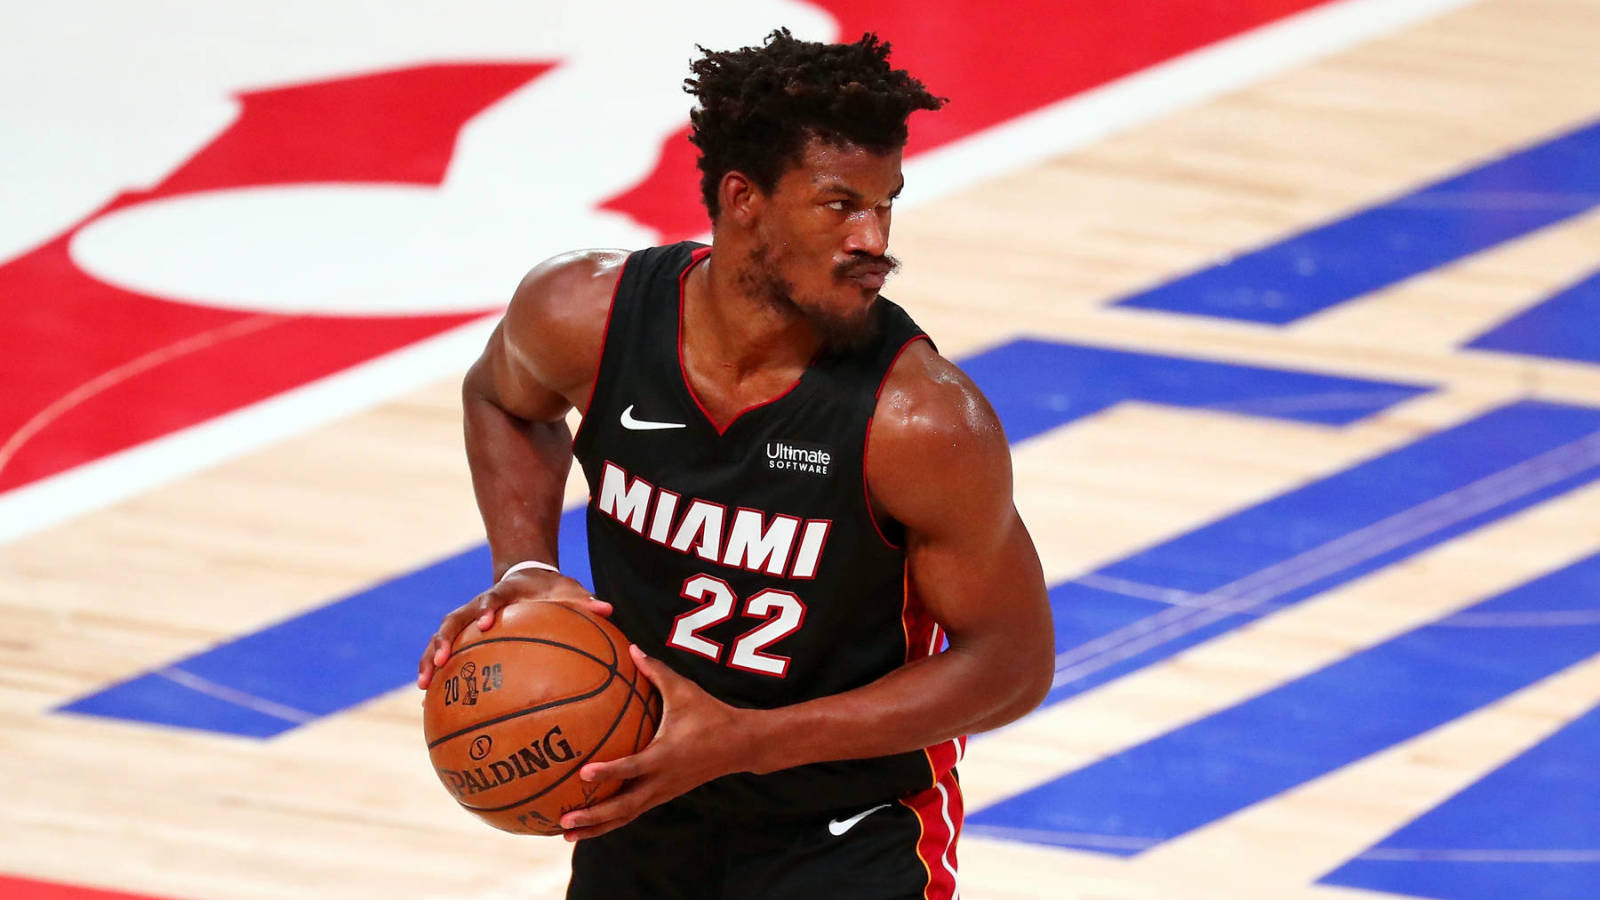 Jimmy Butler After NBA Finals Loss: 'We'll be back' - The Source